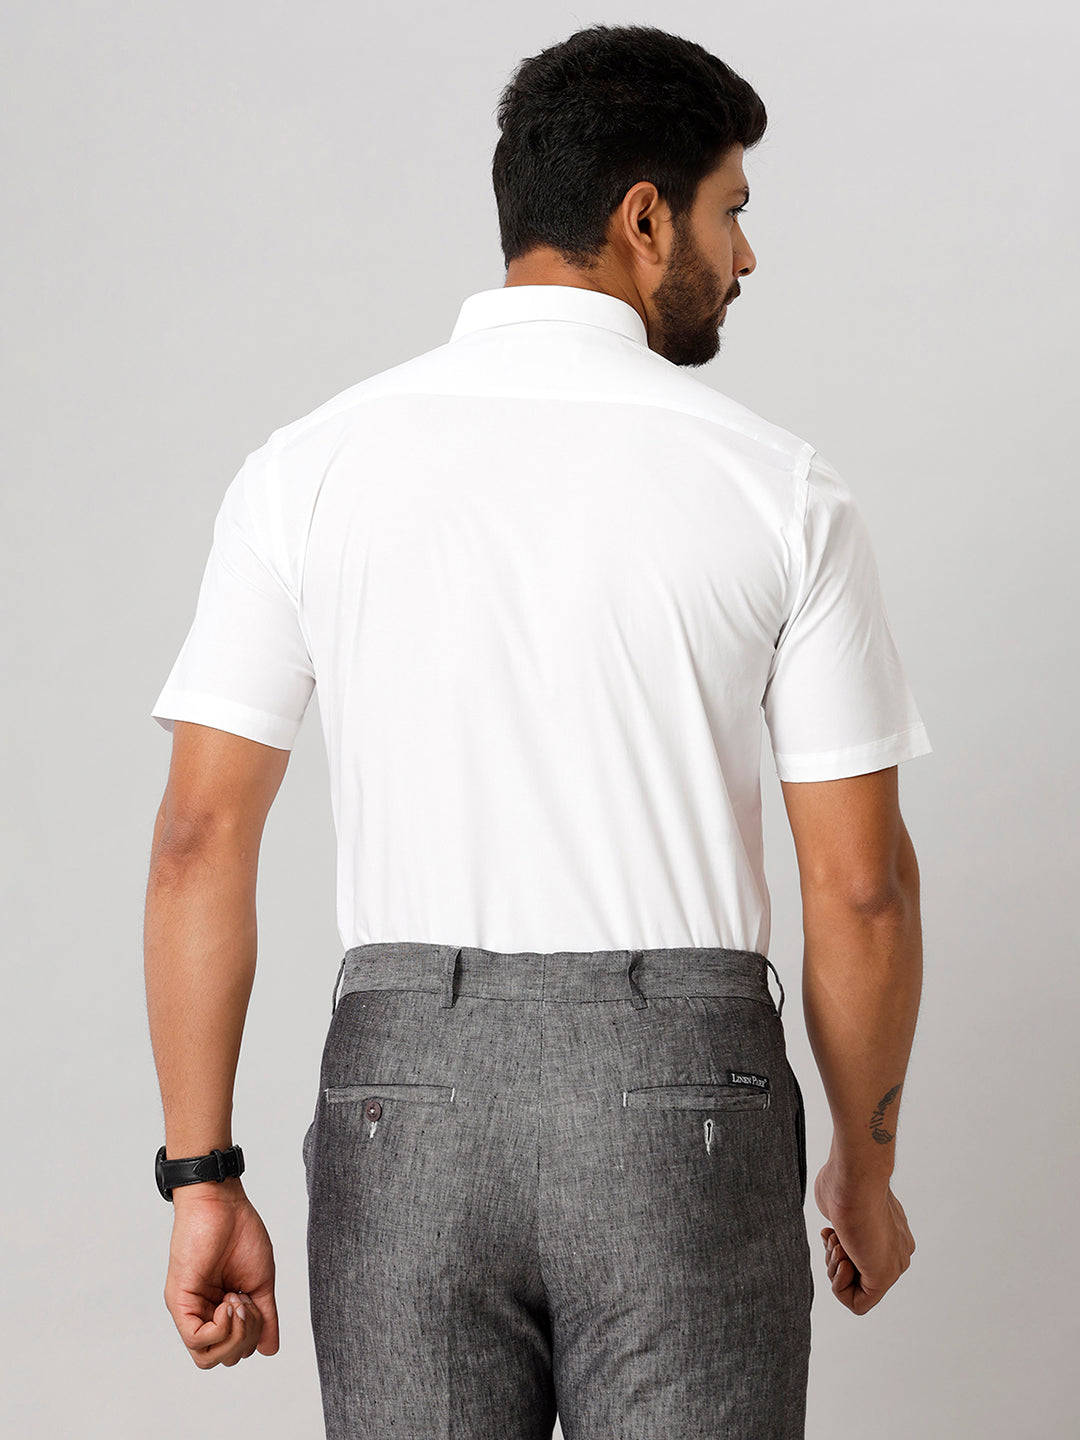 Mens 100% Cotton Half Sleeves White Shirt Victory-Back view